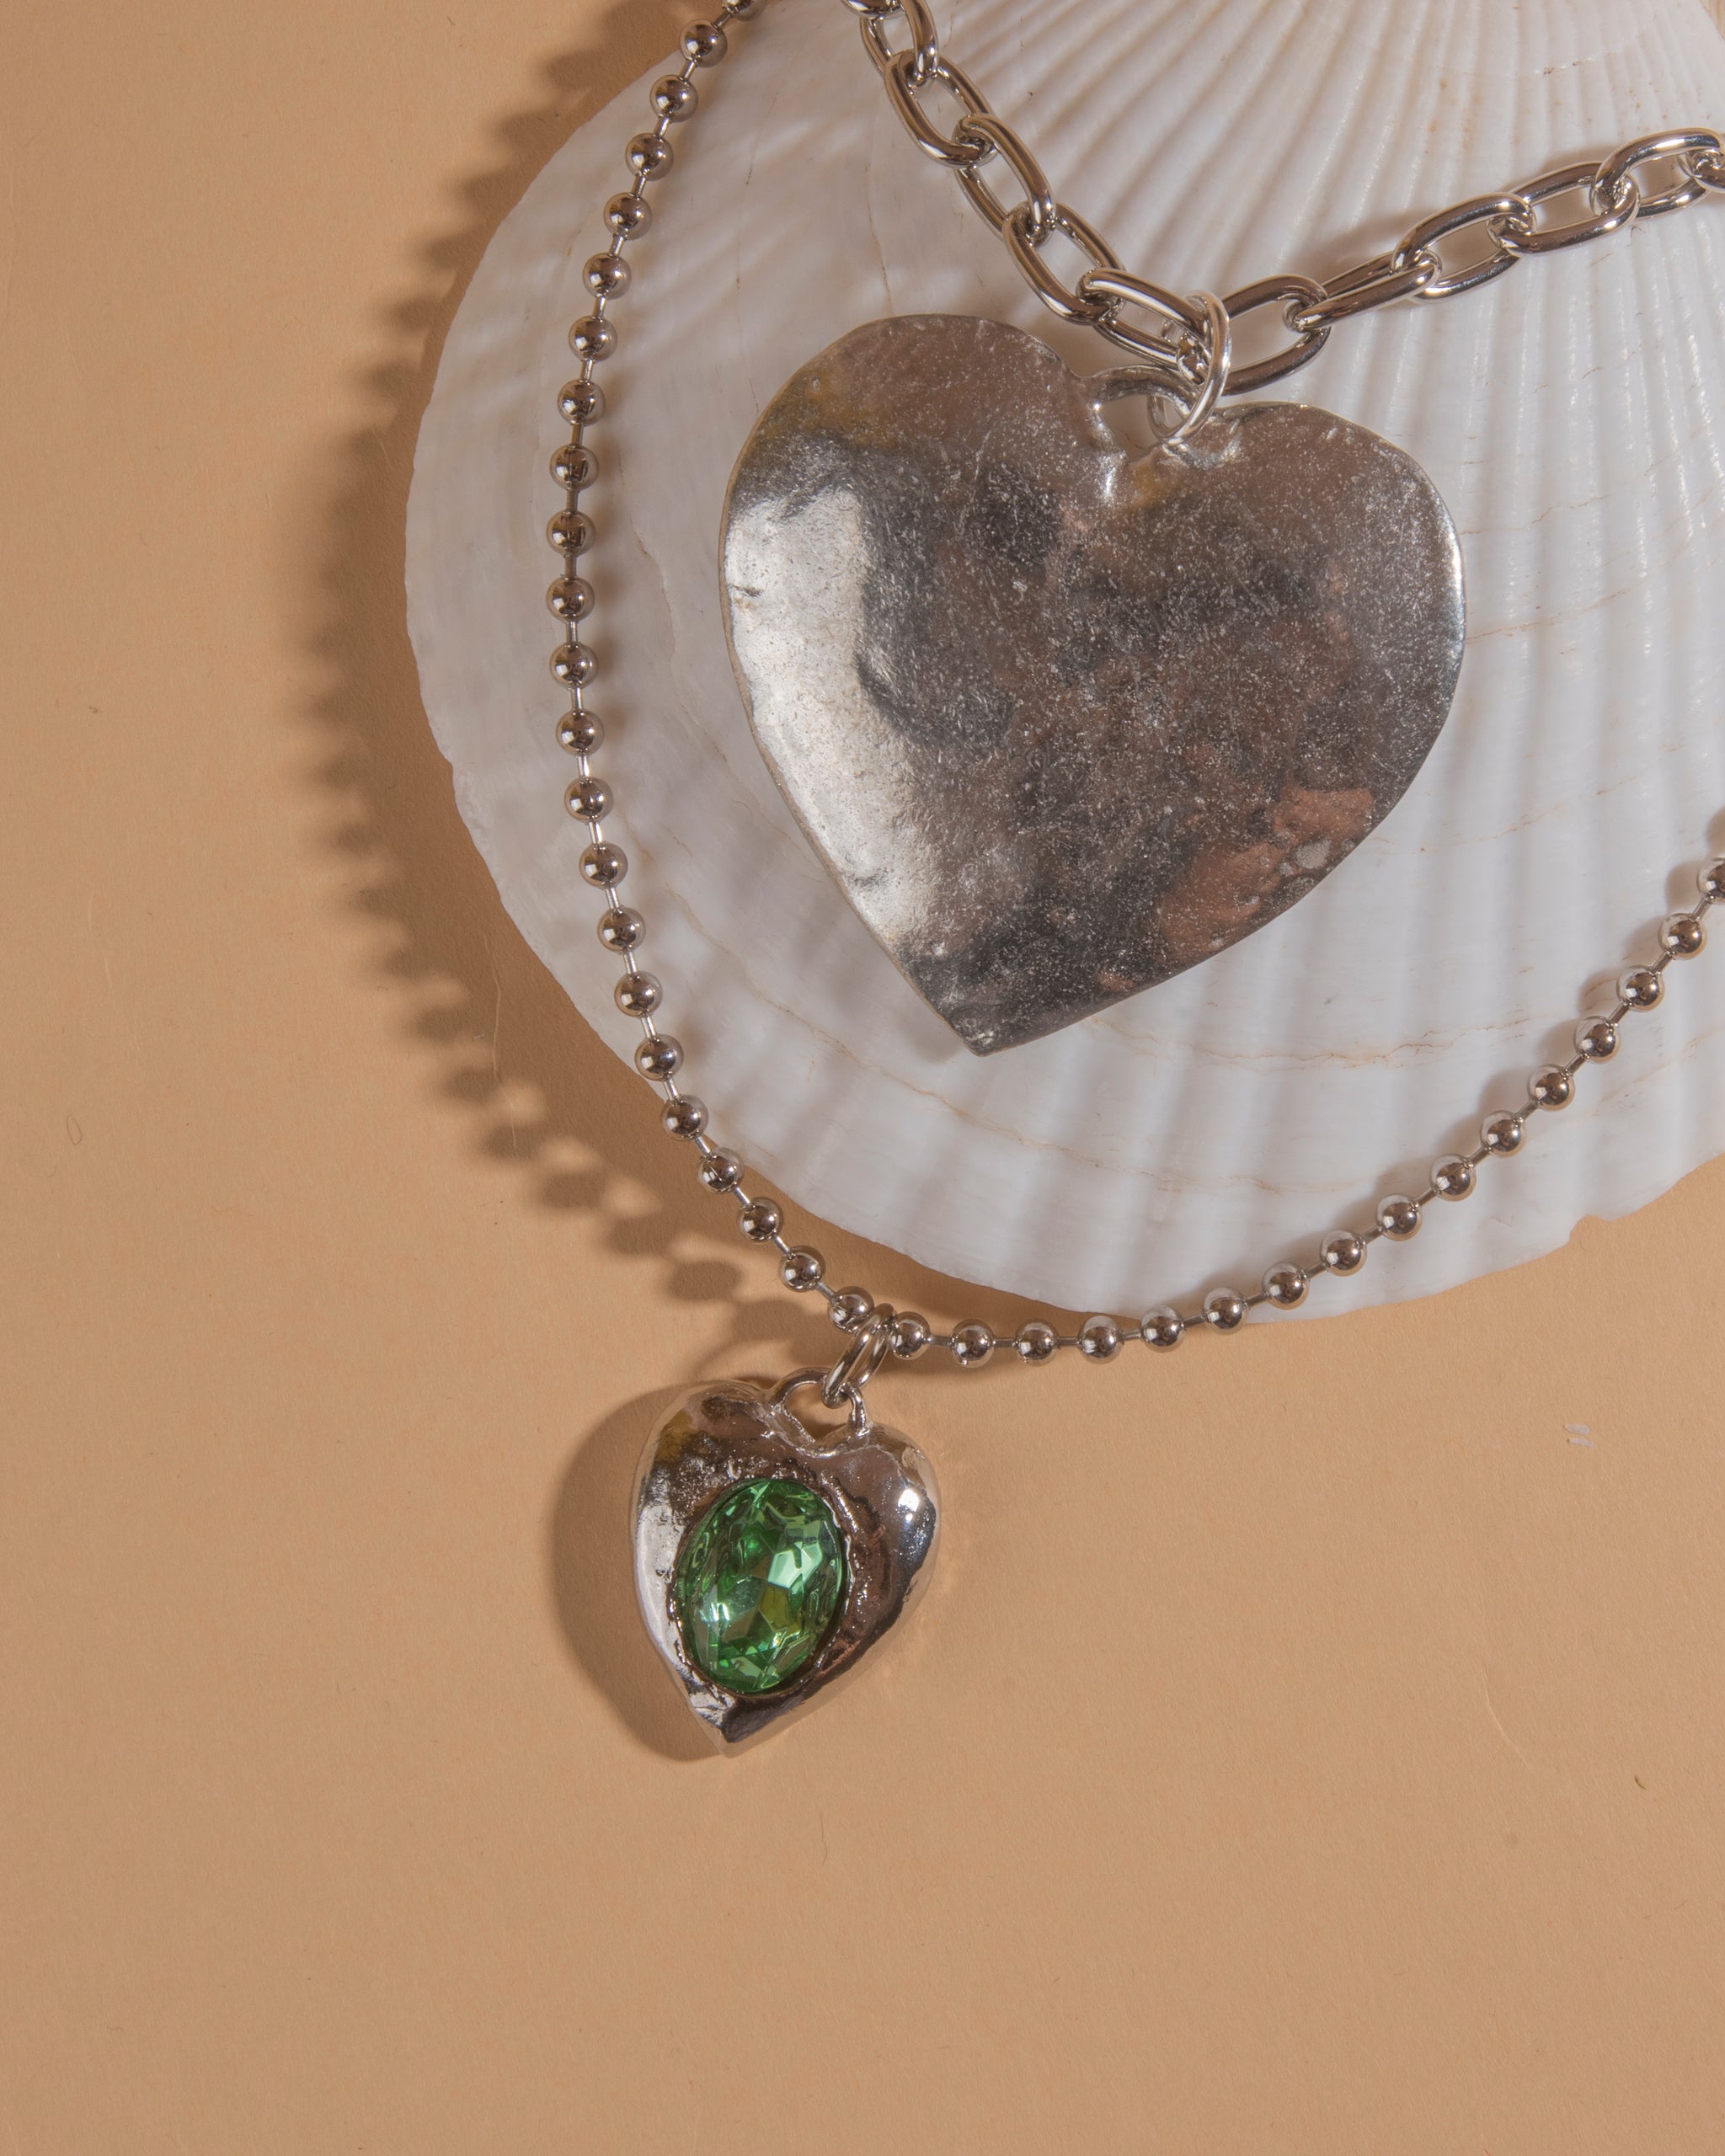 Silver-tone heart necklace on cable chain